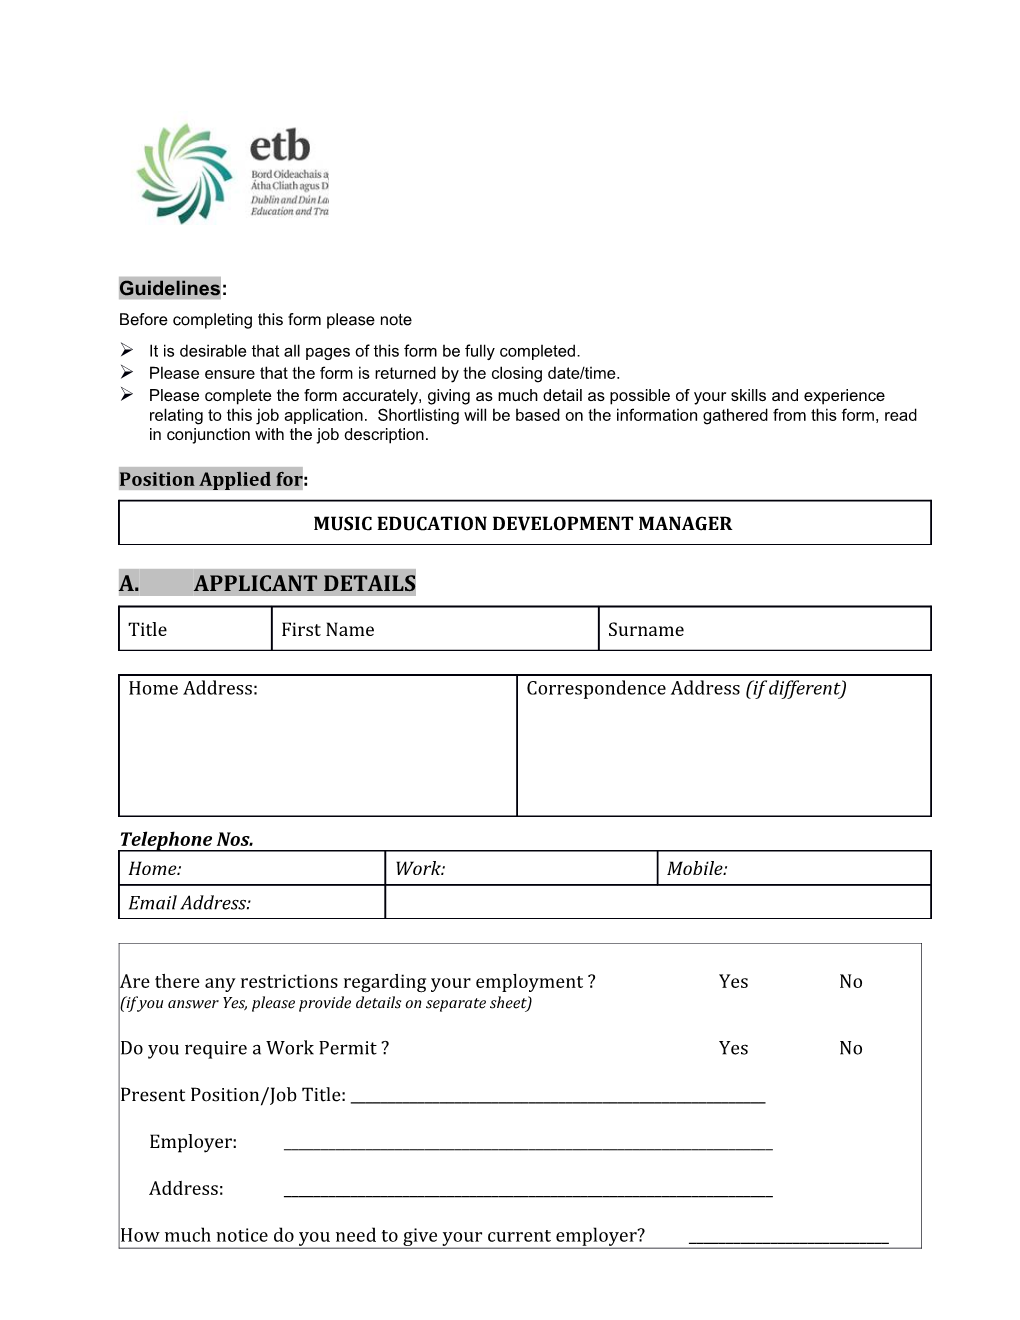 Before Completing This Form Please Note